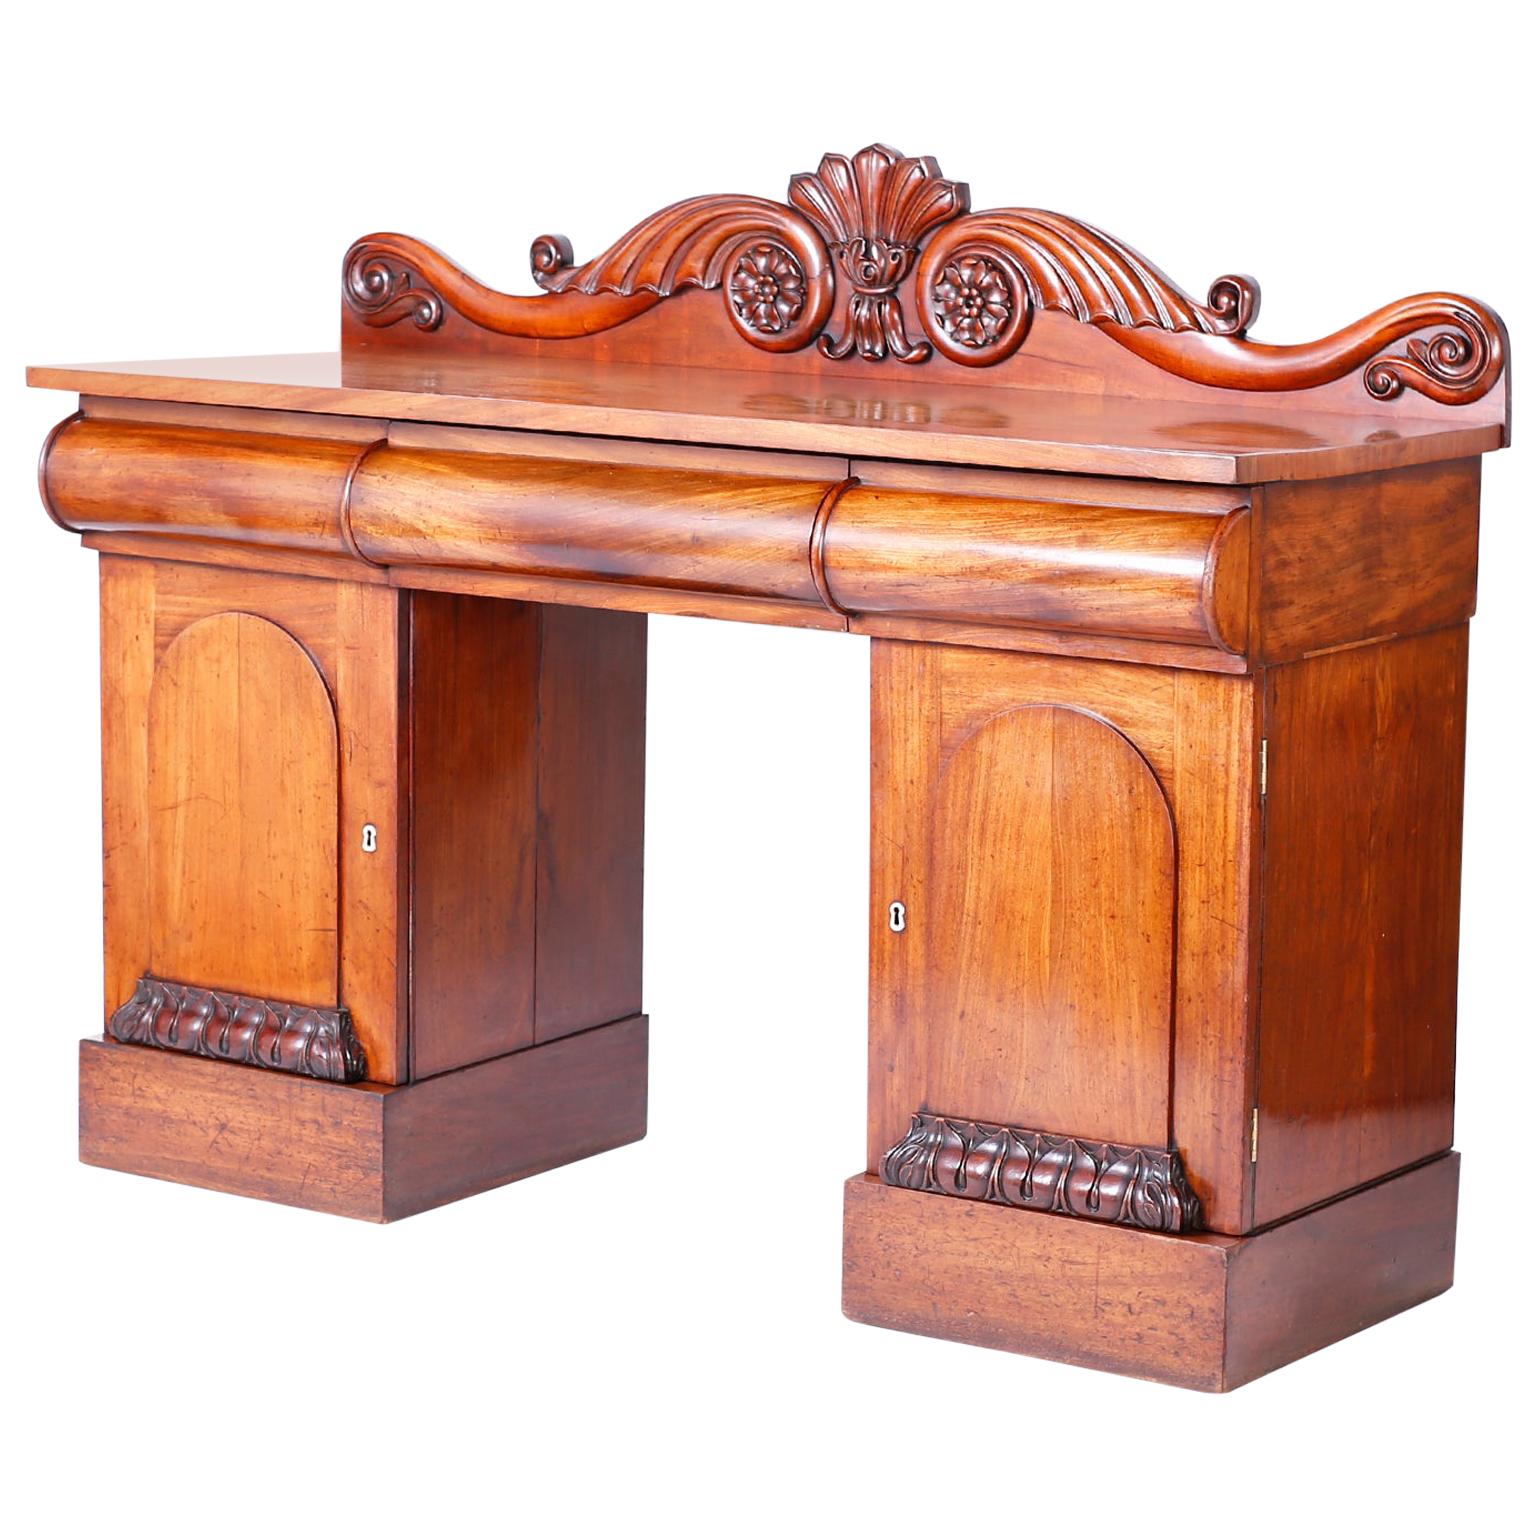 British Colonial Style Sideboard or Server For Sale